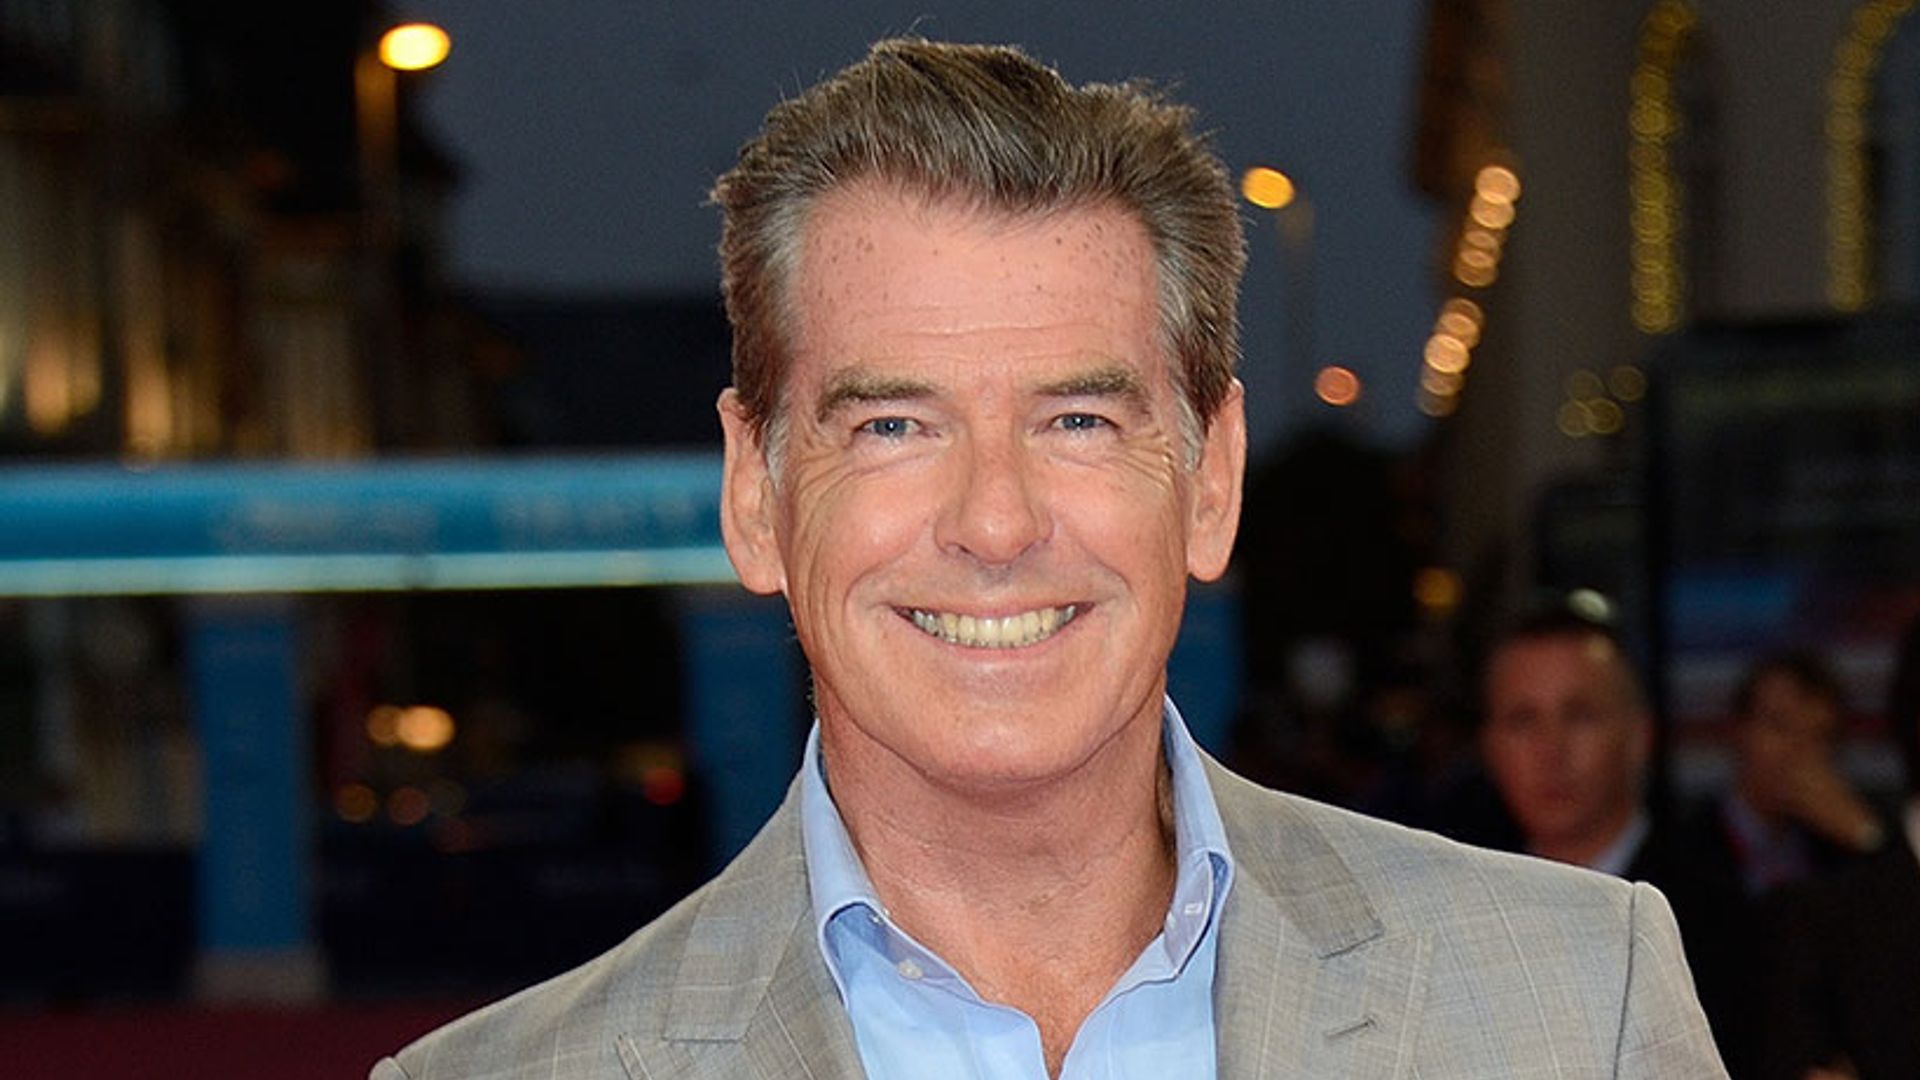 Pierce Brosnan 'distressed' over 'deceptive' use of his image on product linked to cancer